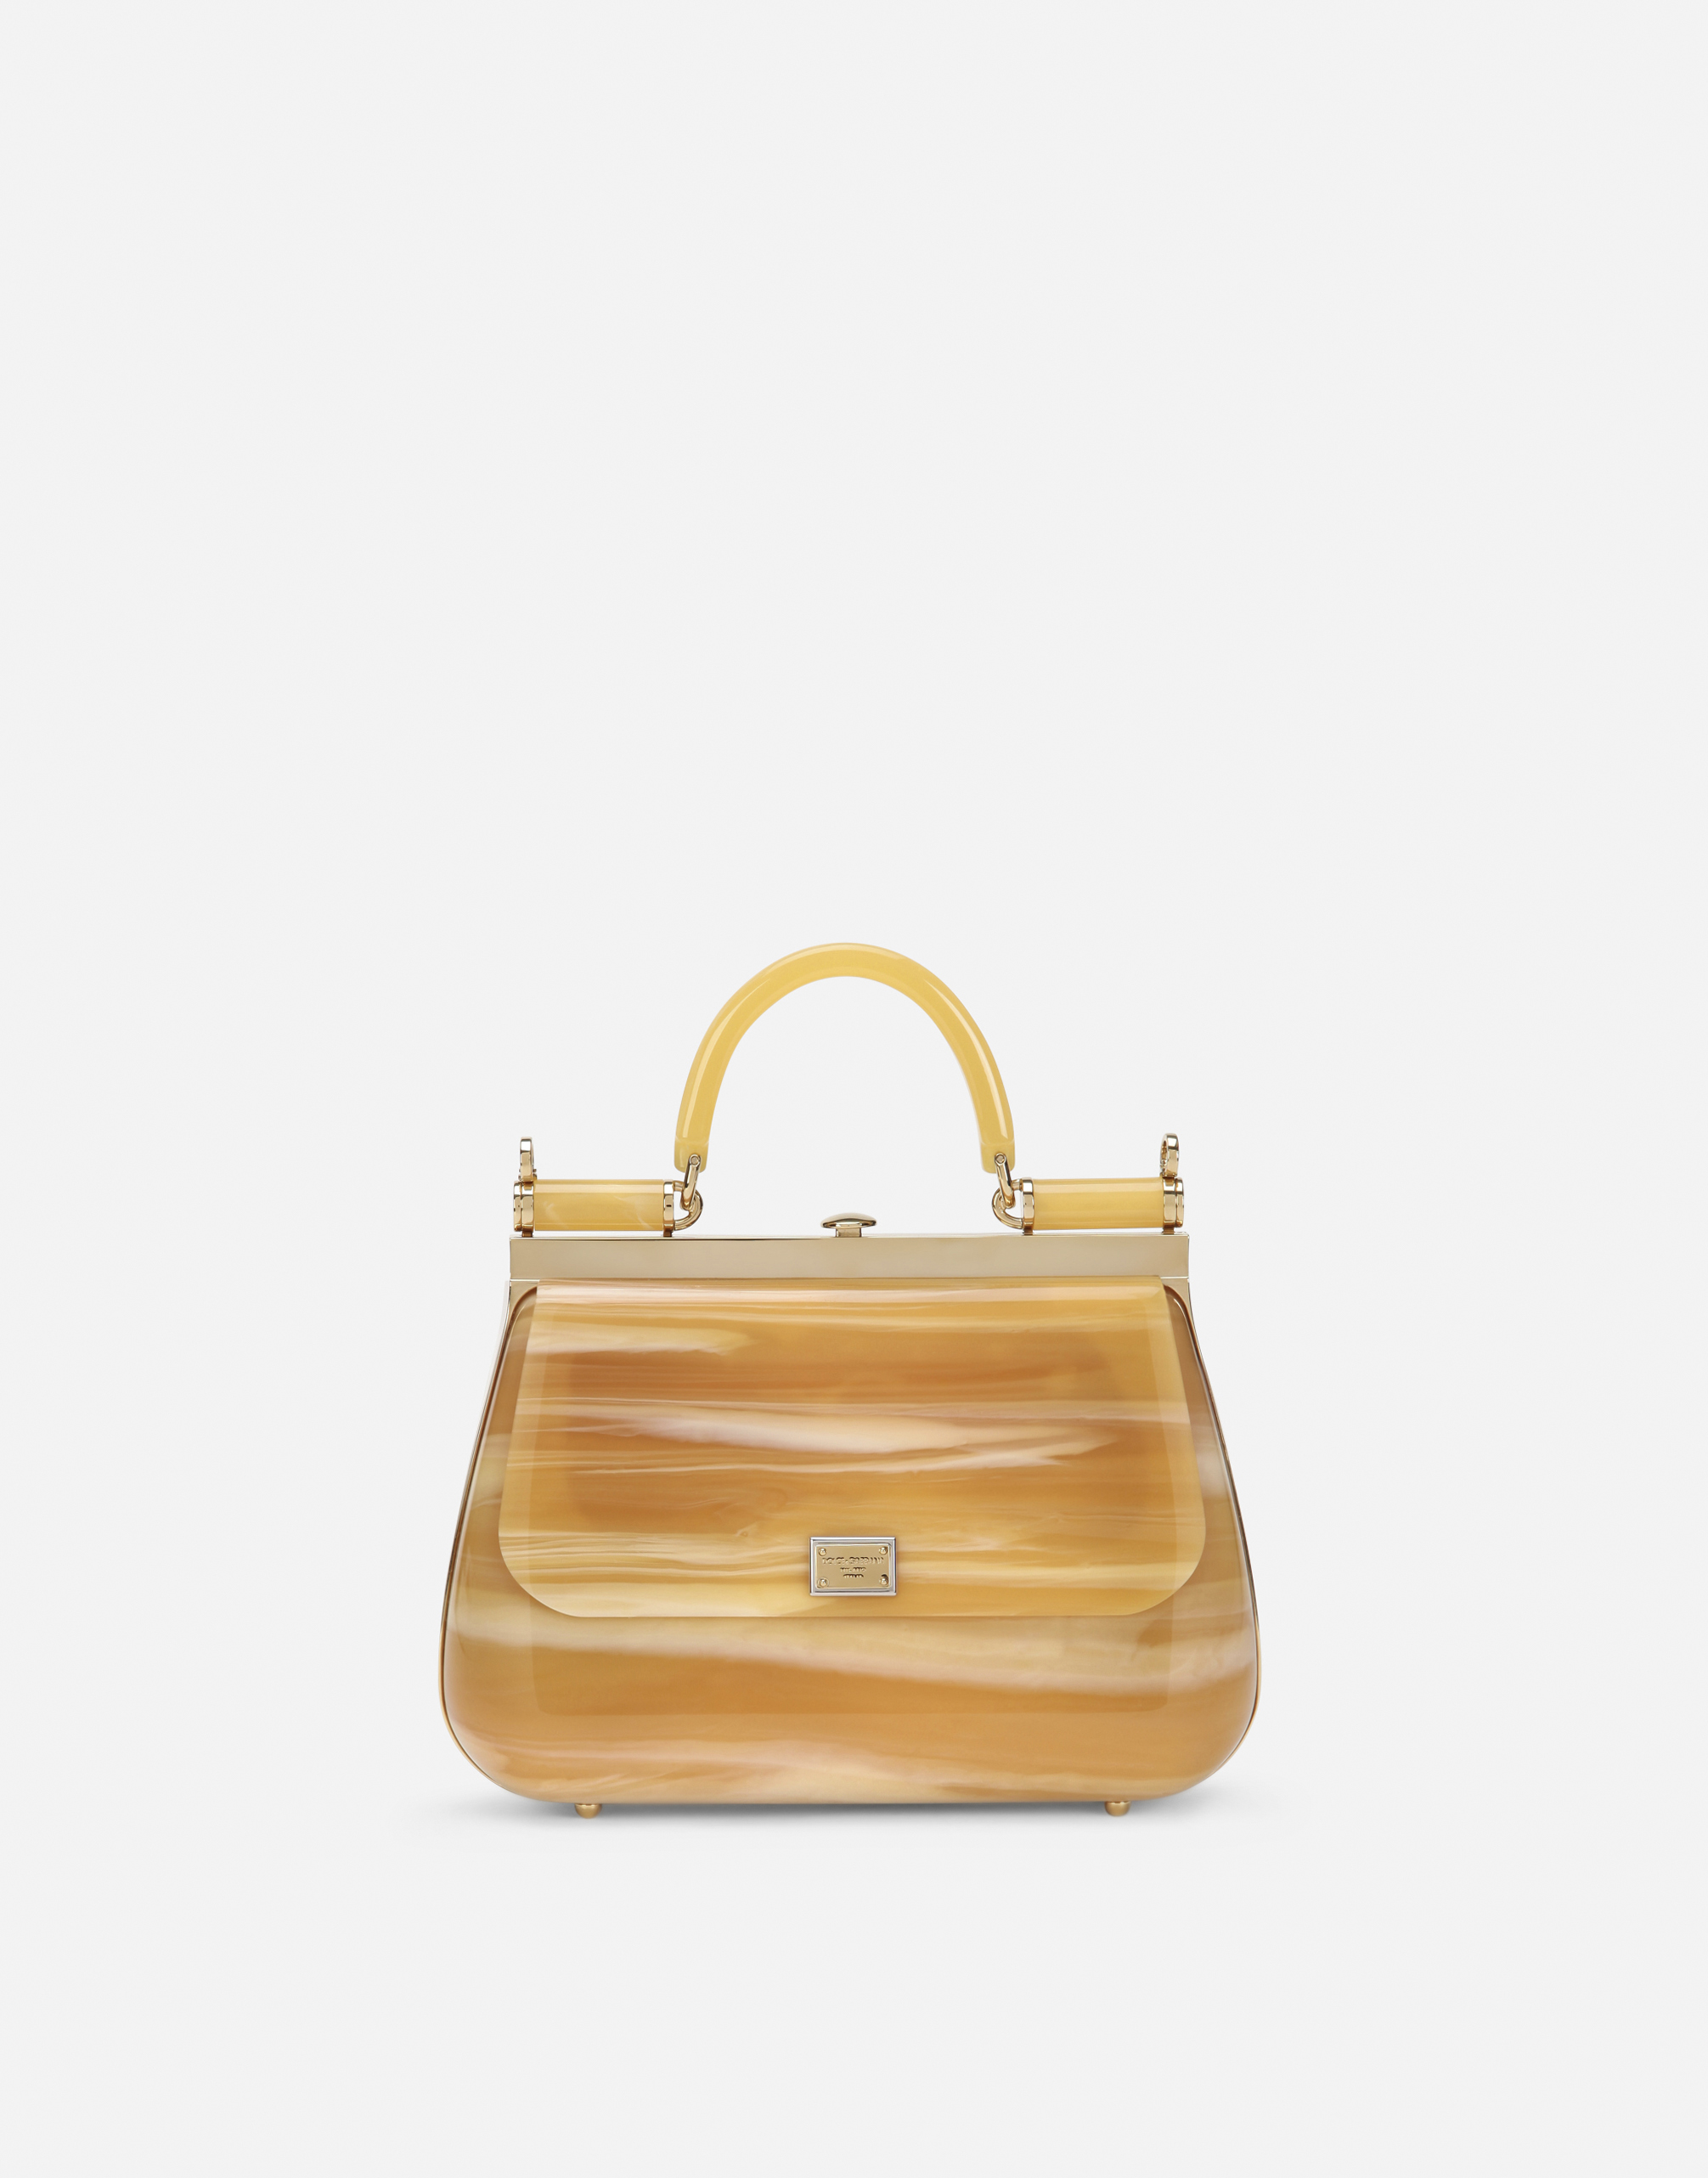 Sicily box bag in acrylic glass in Amber